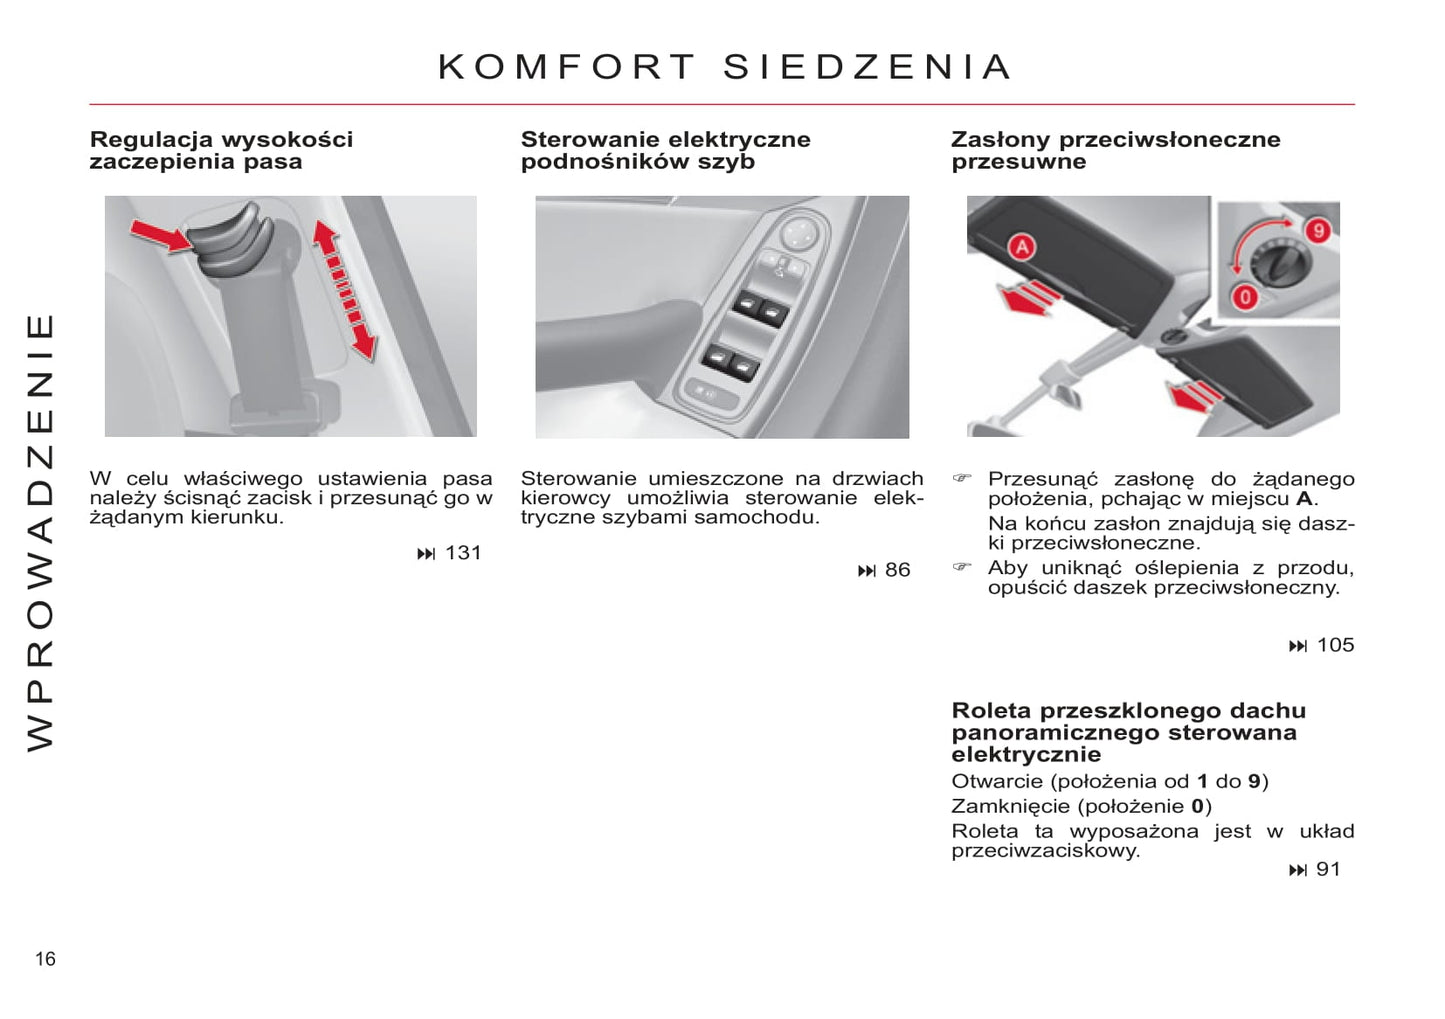 2011-2013 Citroën C4 Picasso/Grand C4 Picasso Owner's Manual | Polish